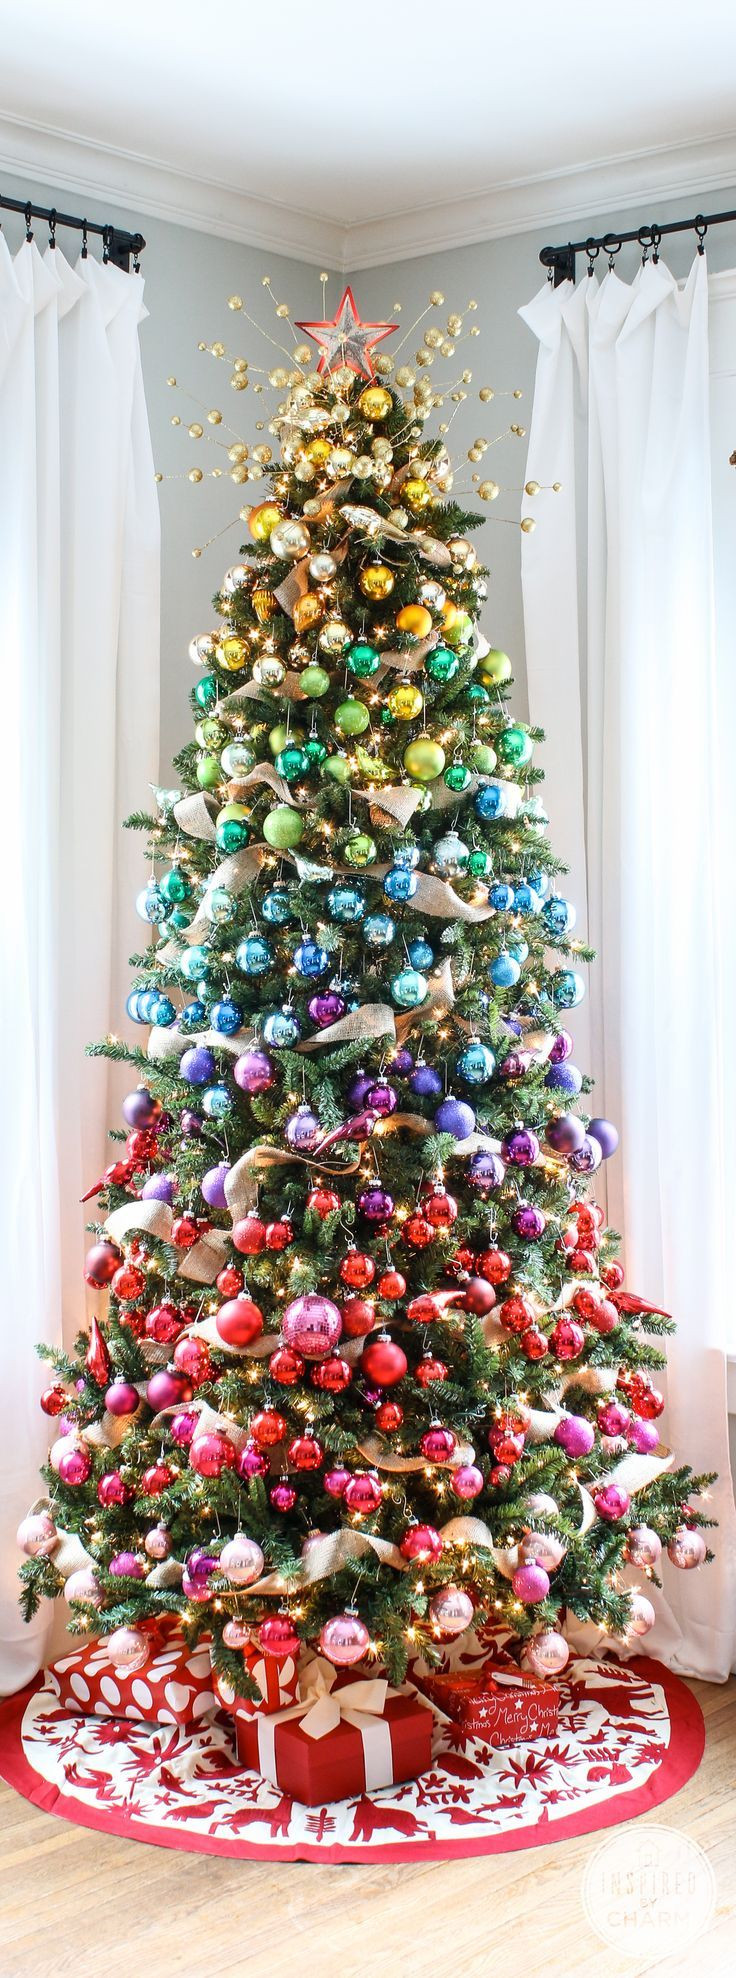 Unique Christmas Trees Ideas
 DIY Unique Christmas Trees Ideas You Should Try This Year